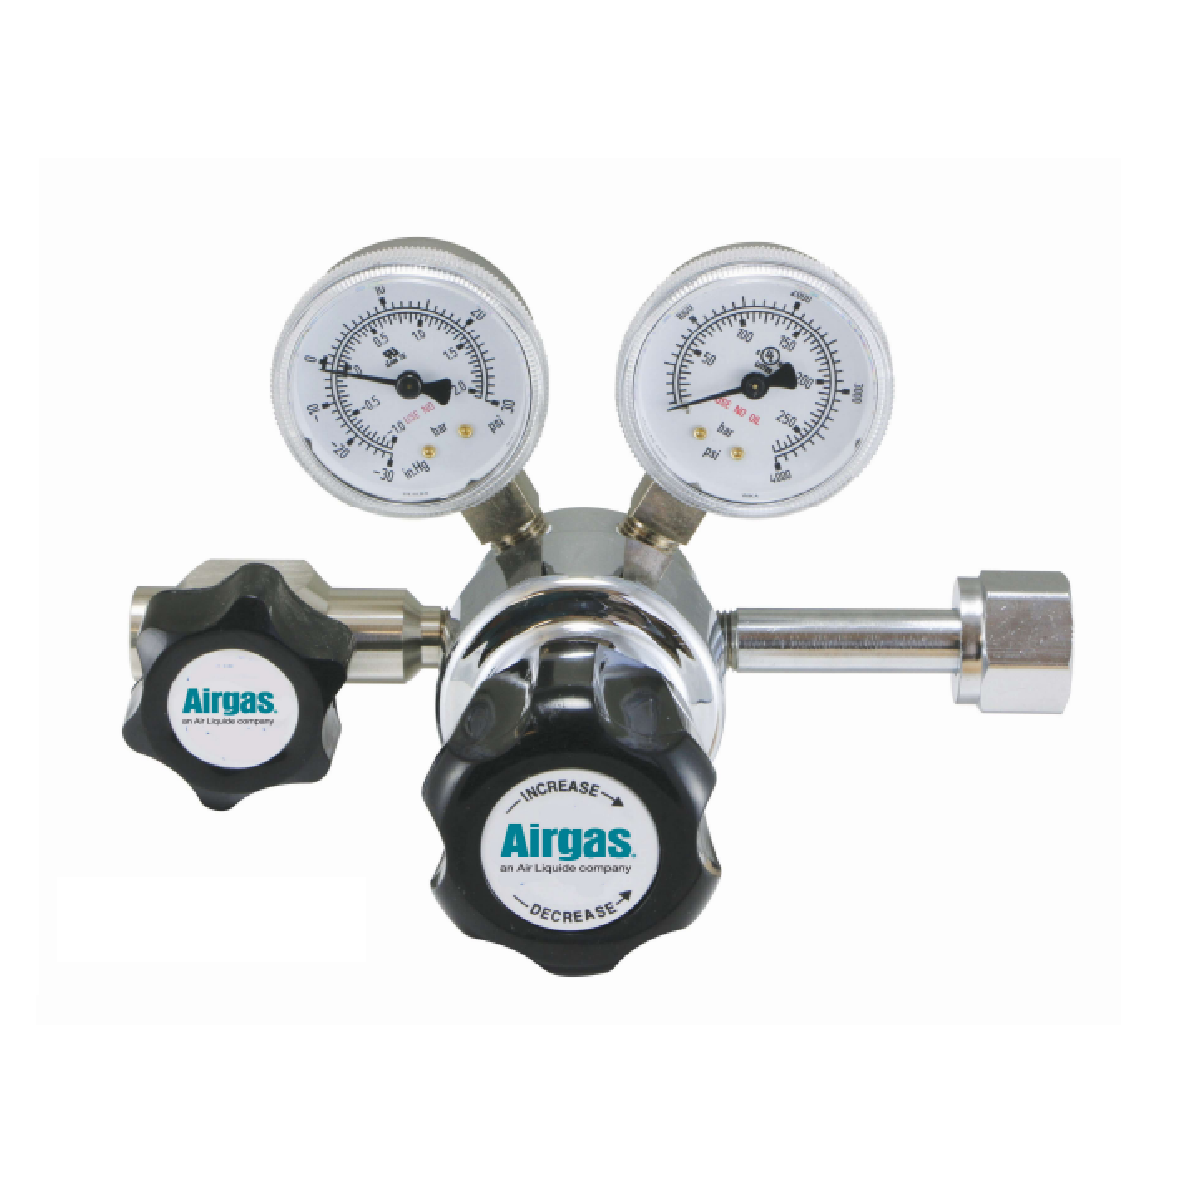 Airgas Model 205C590 Chrome-Plated Brass High Purity Single Stage Regulator With CGA-590 Connection